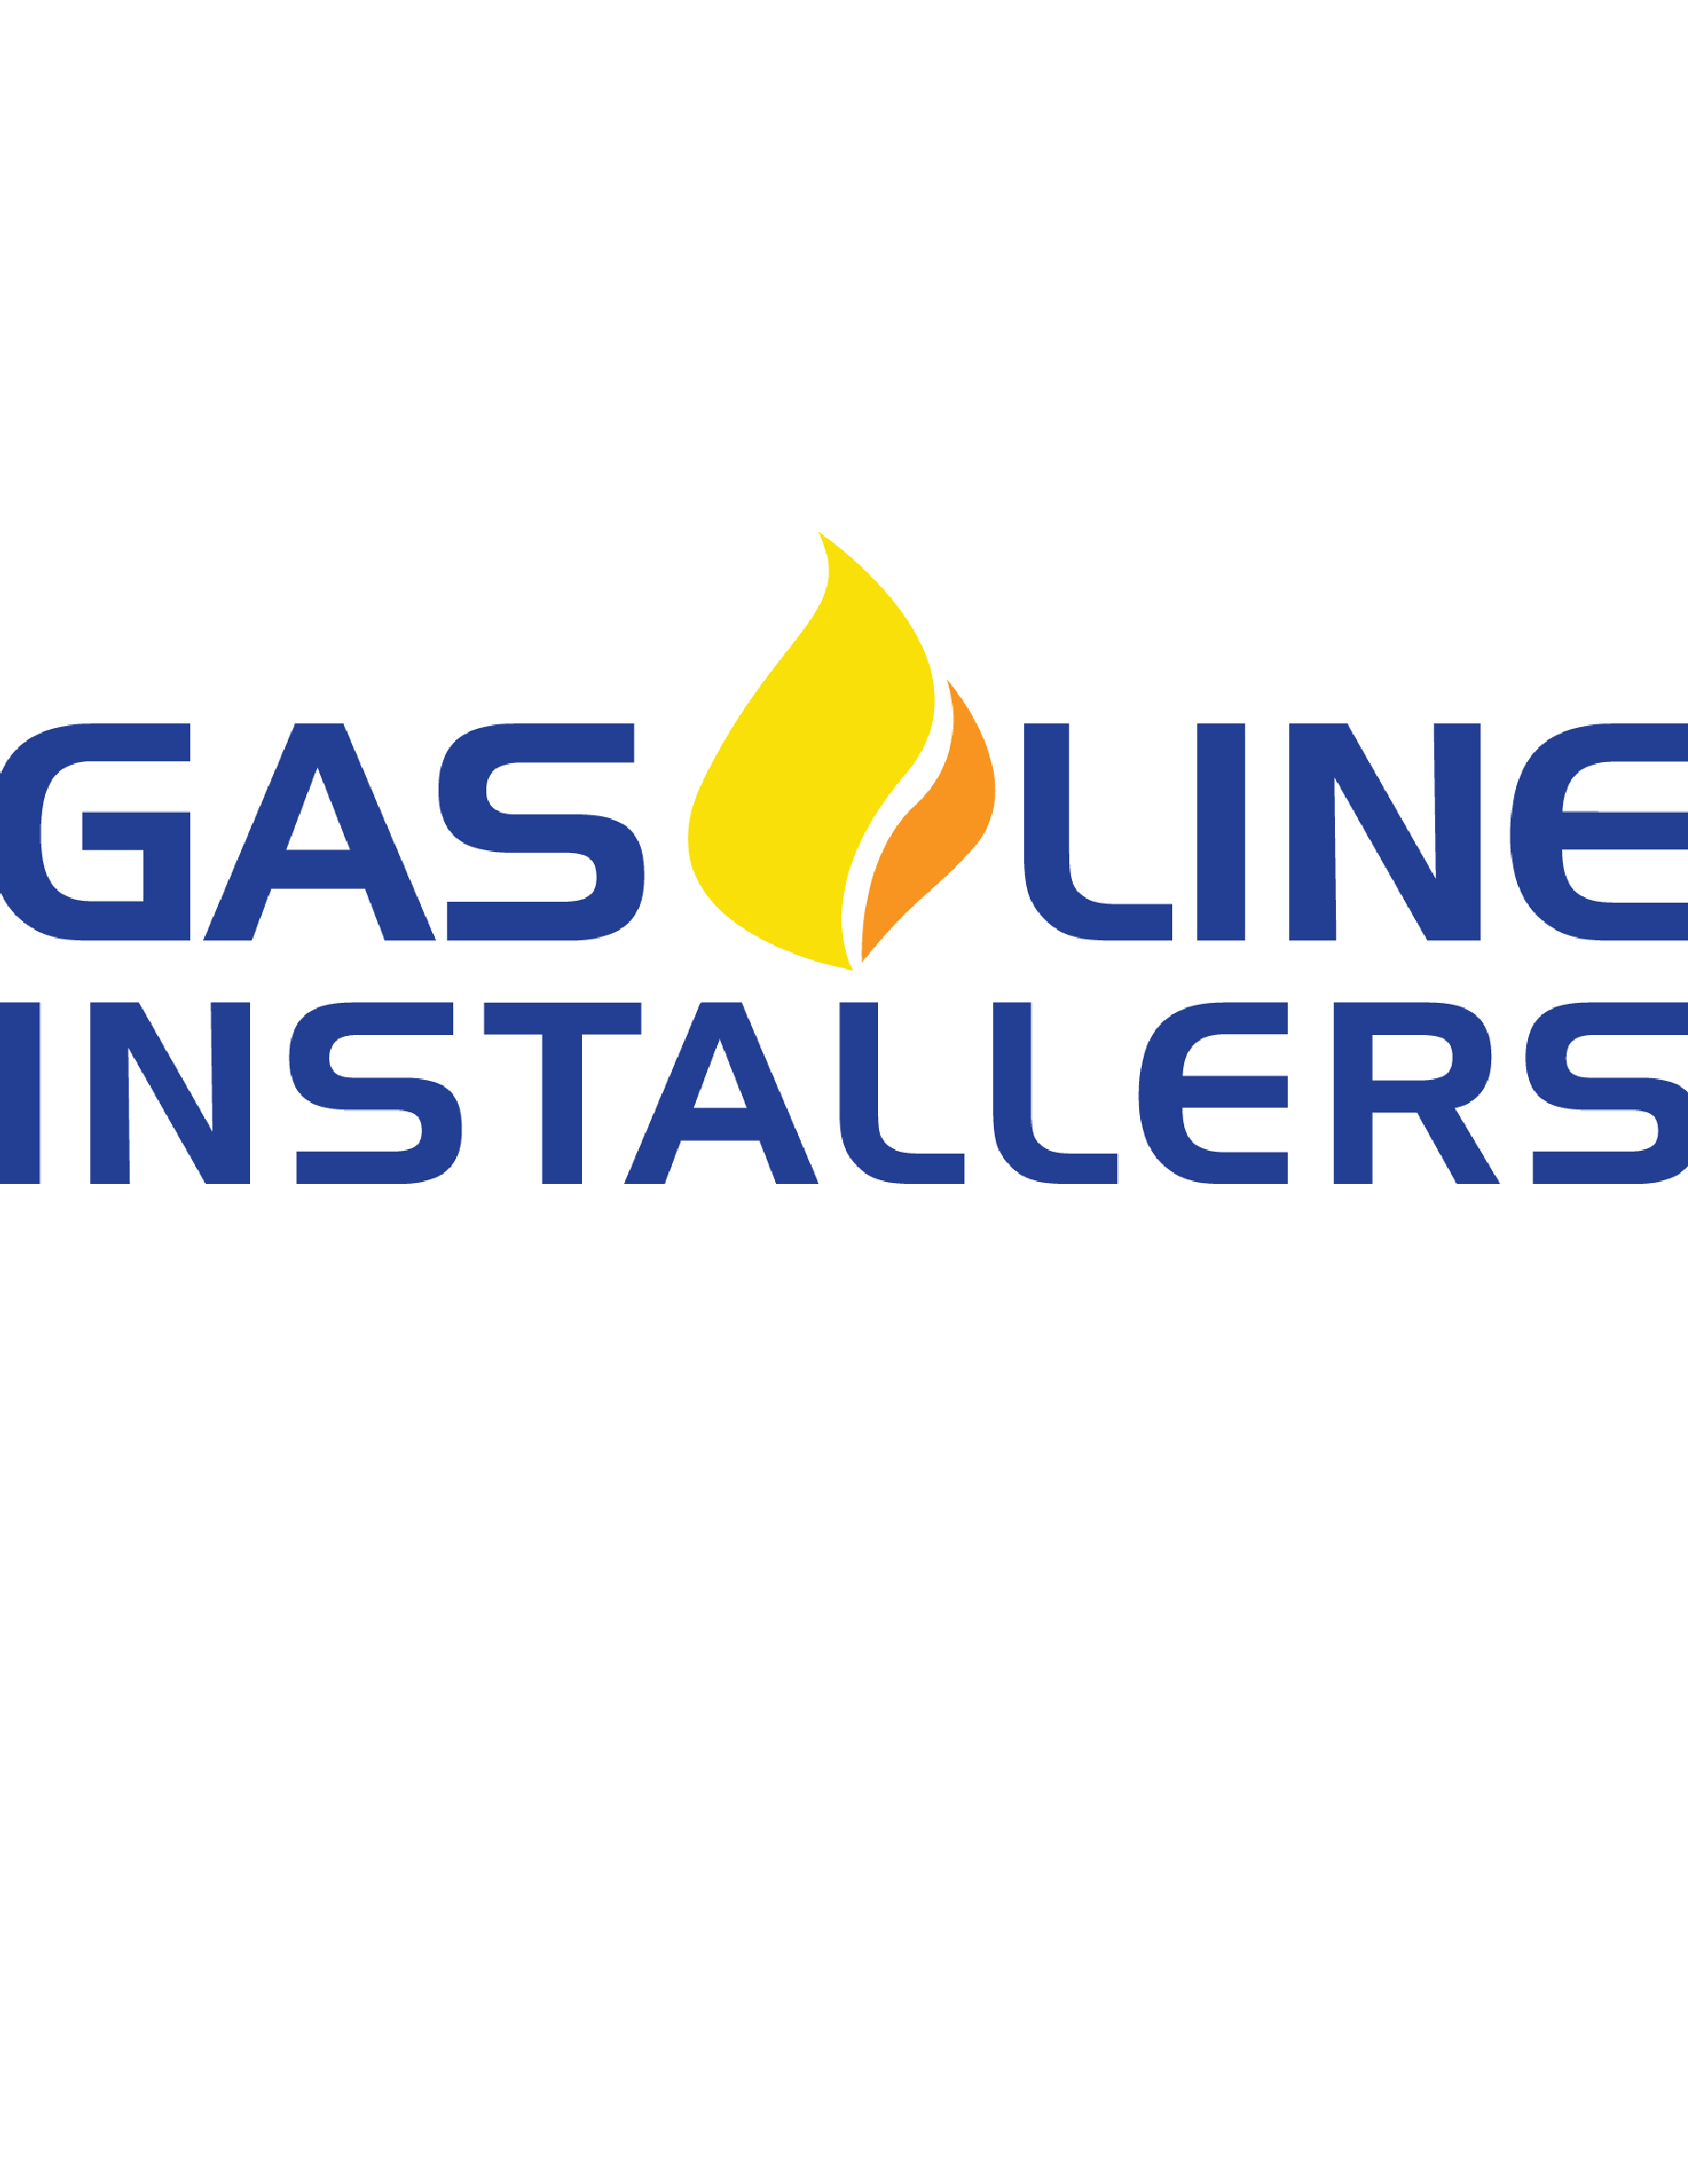 Gas Line Installers's logo